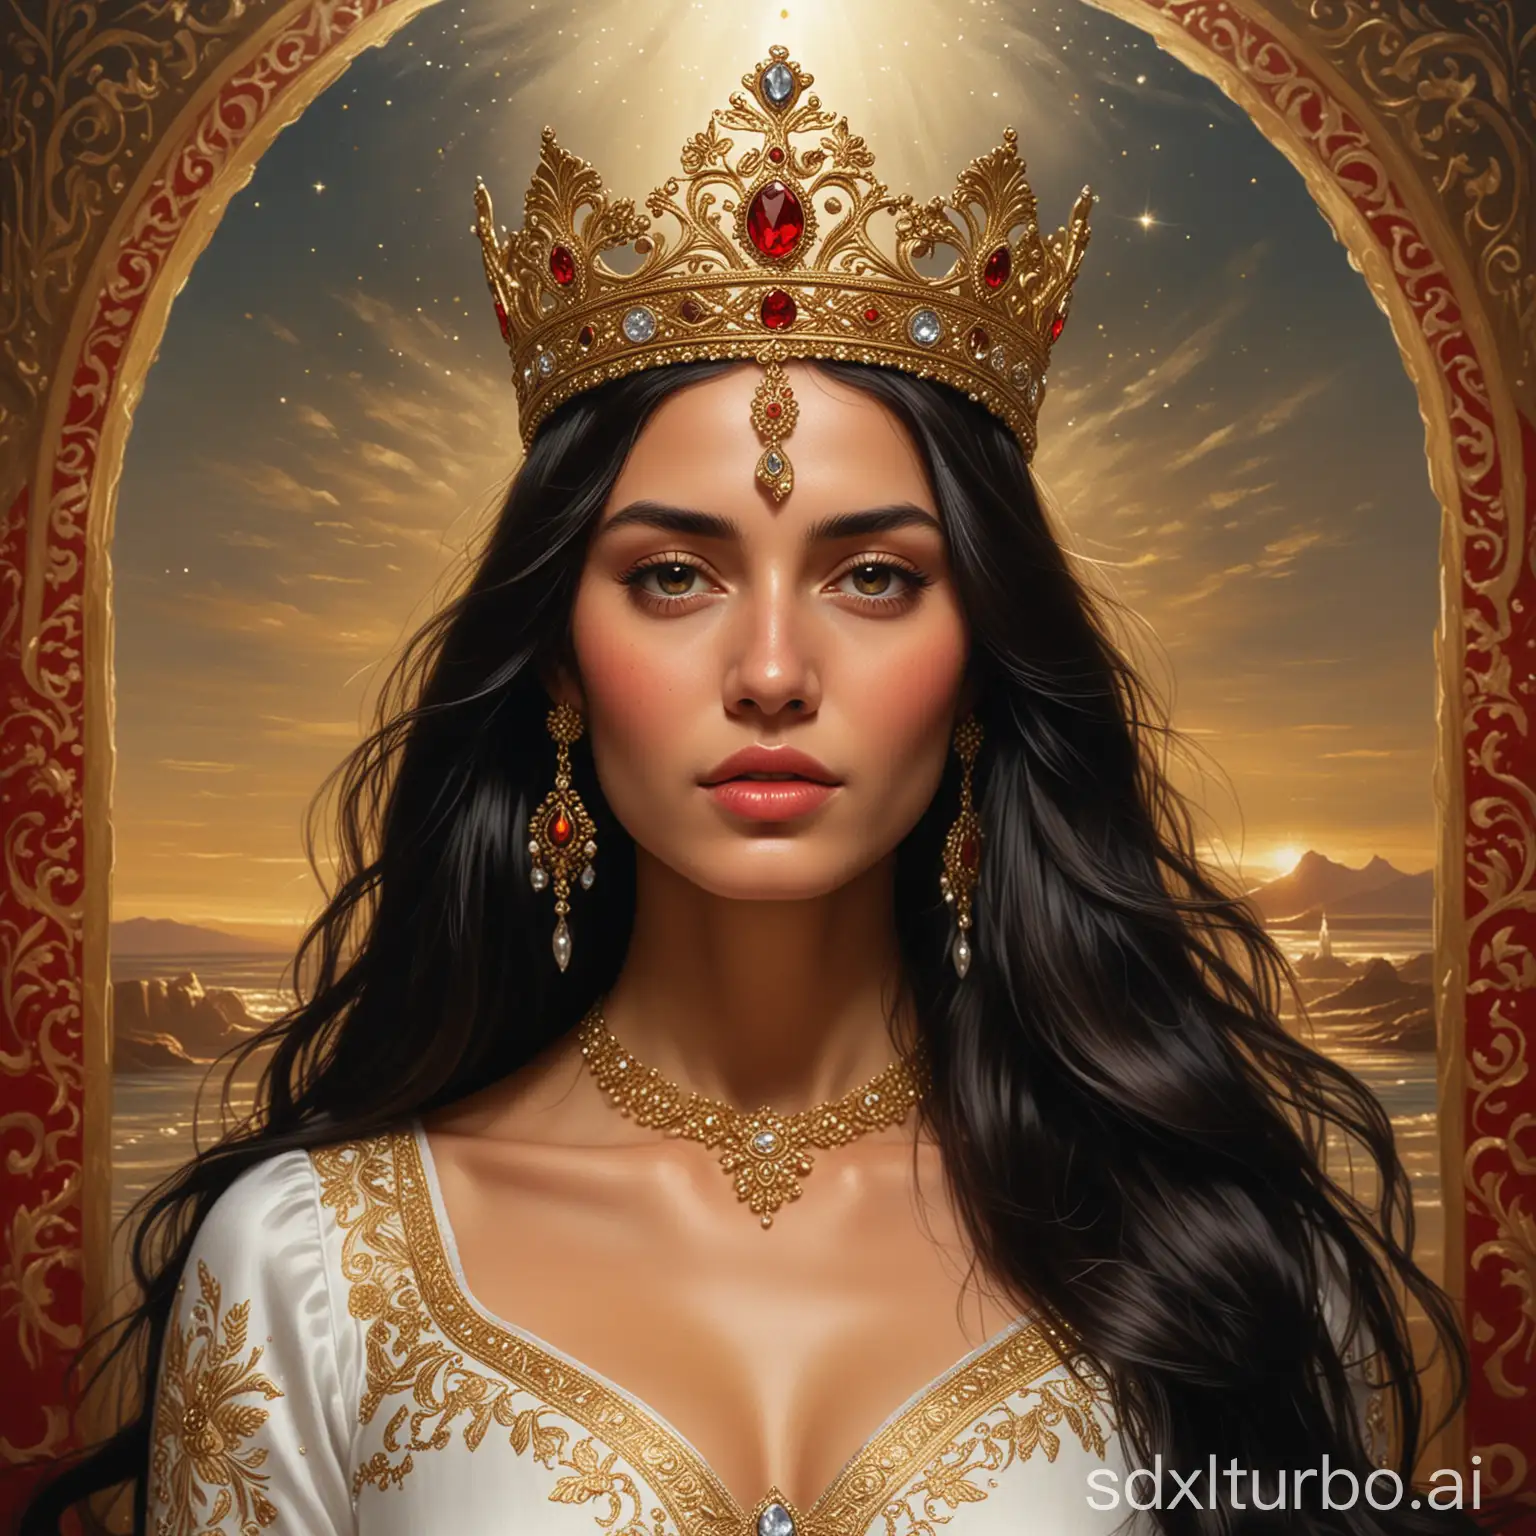 The image depicts a woman with long, dark hair wearing a gold crown with a large, ornate design. The crown is adorned with a large, sparkling diamond at the top, and the woman is wearing a white dress with gold embroidery. The background is dark and blurred, creating a sense of depth and drawing focus to the woman and her crown.red sea